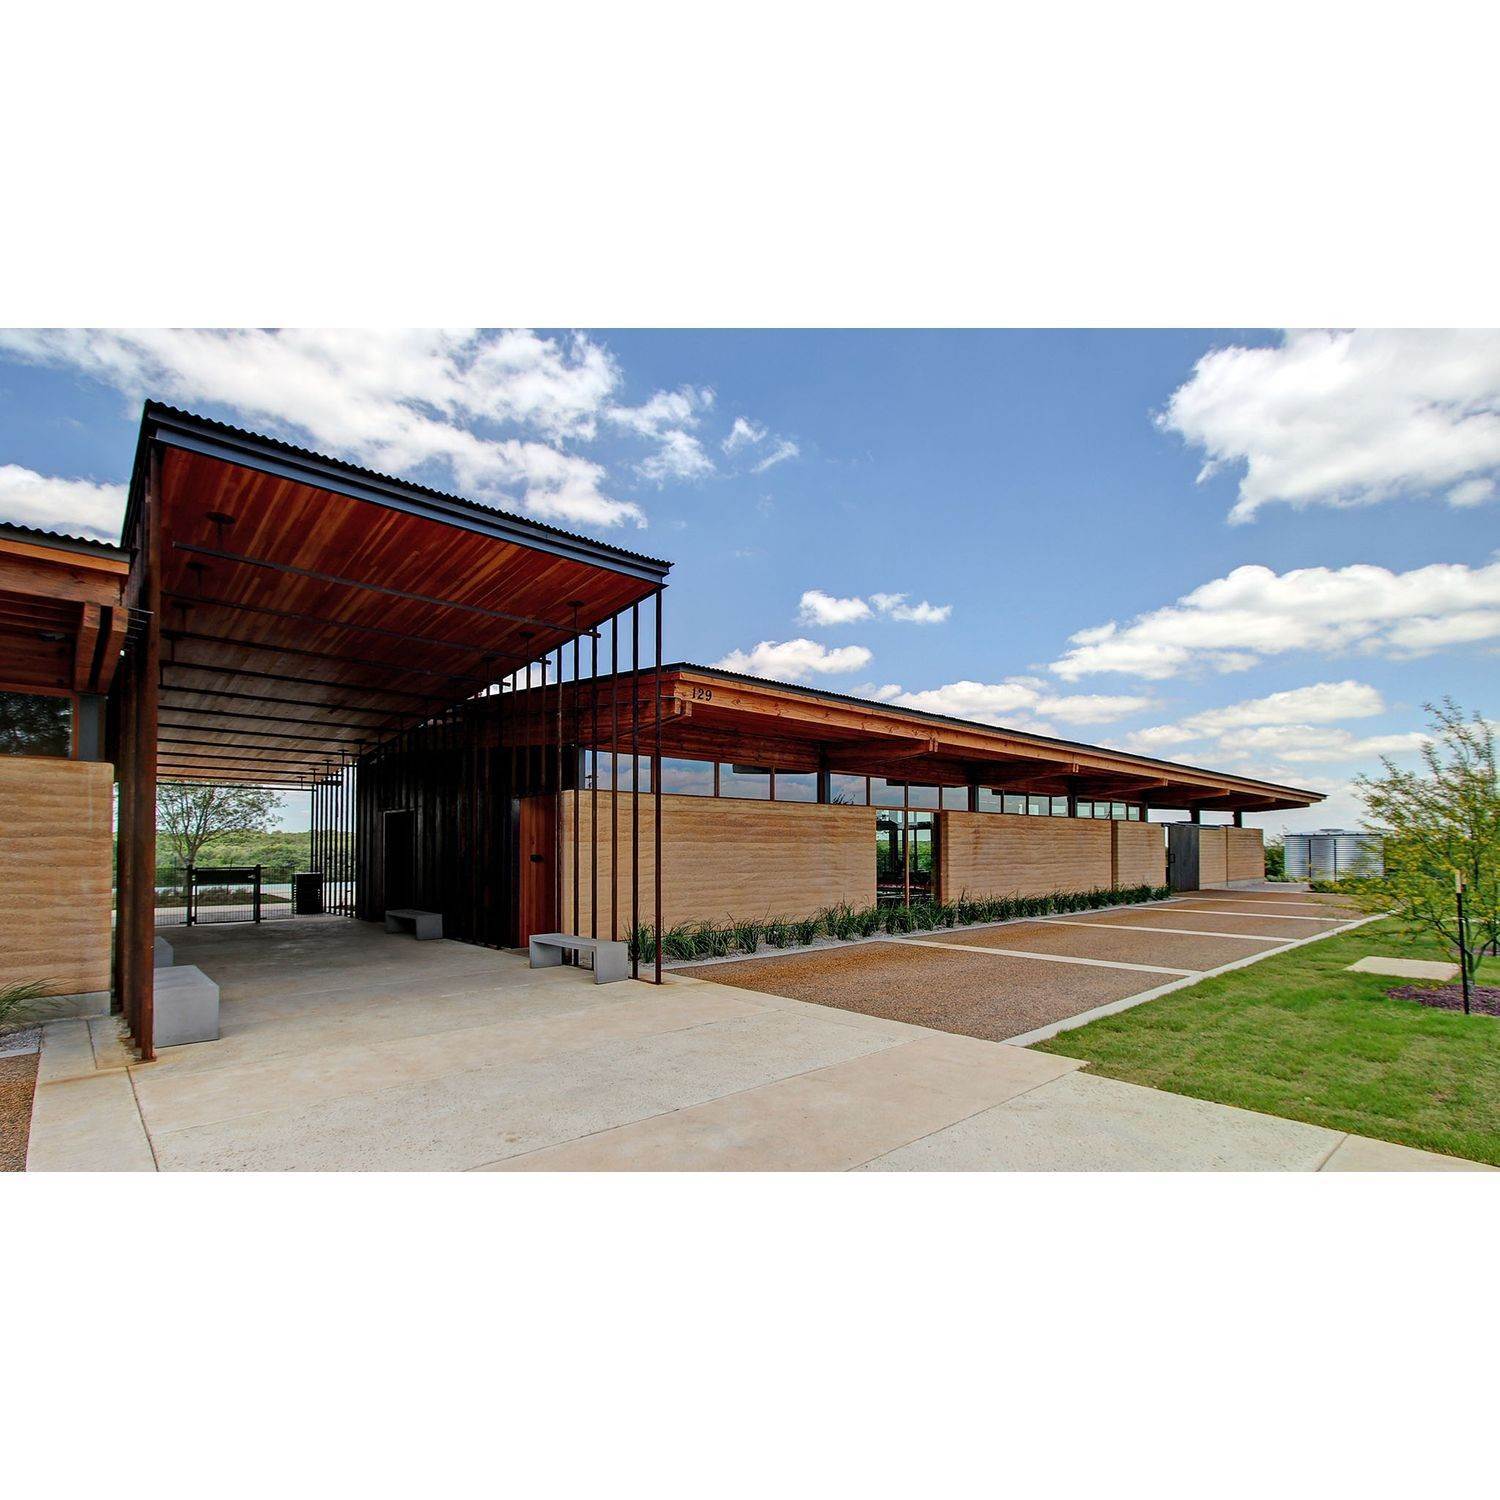 5. Wolf Ranch 51' building at 109 Blackberry Cove, Georgetown, TX 78633